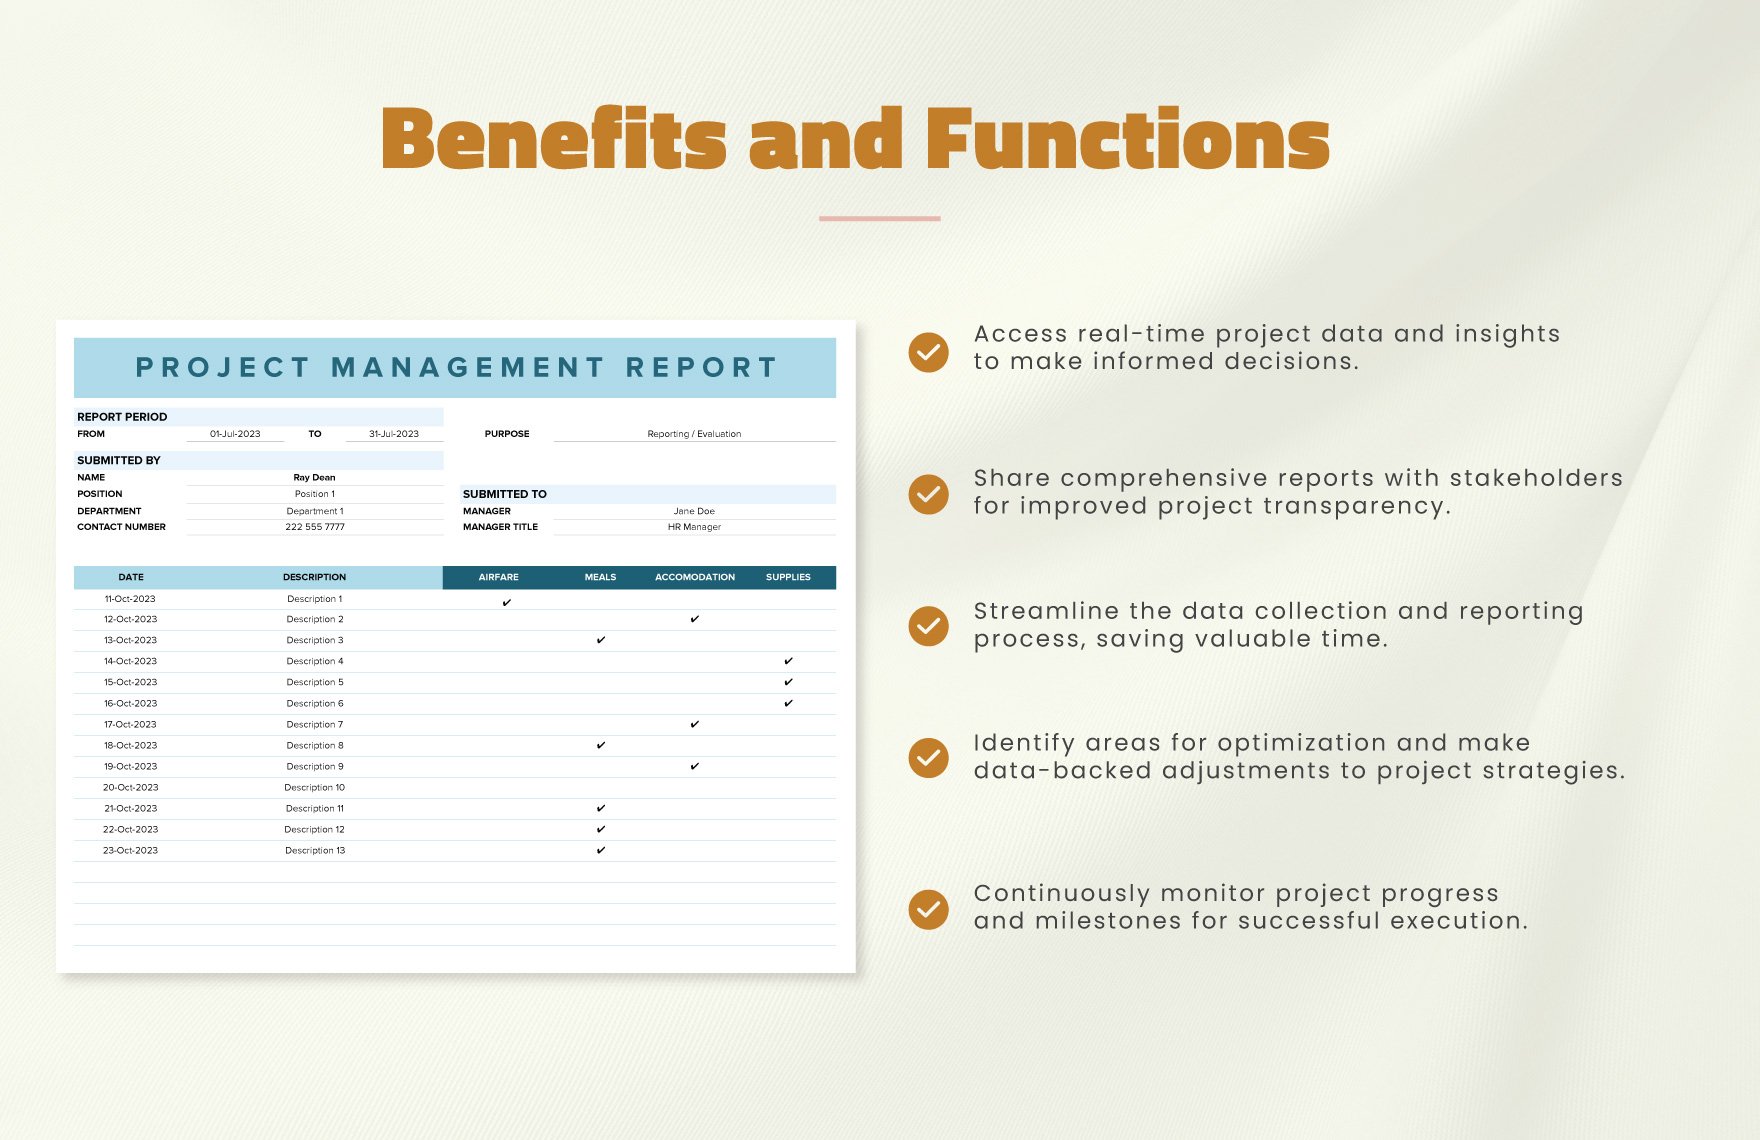 Project Management Report Template